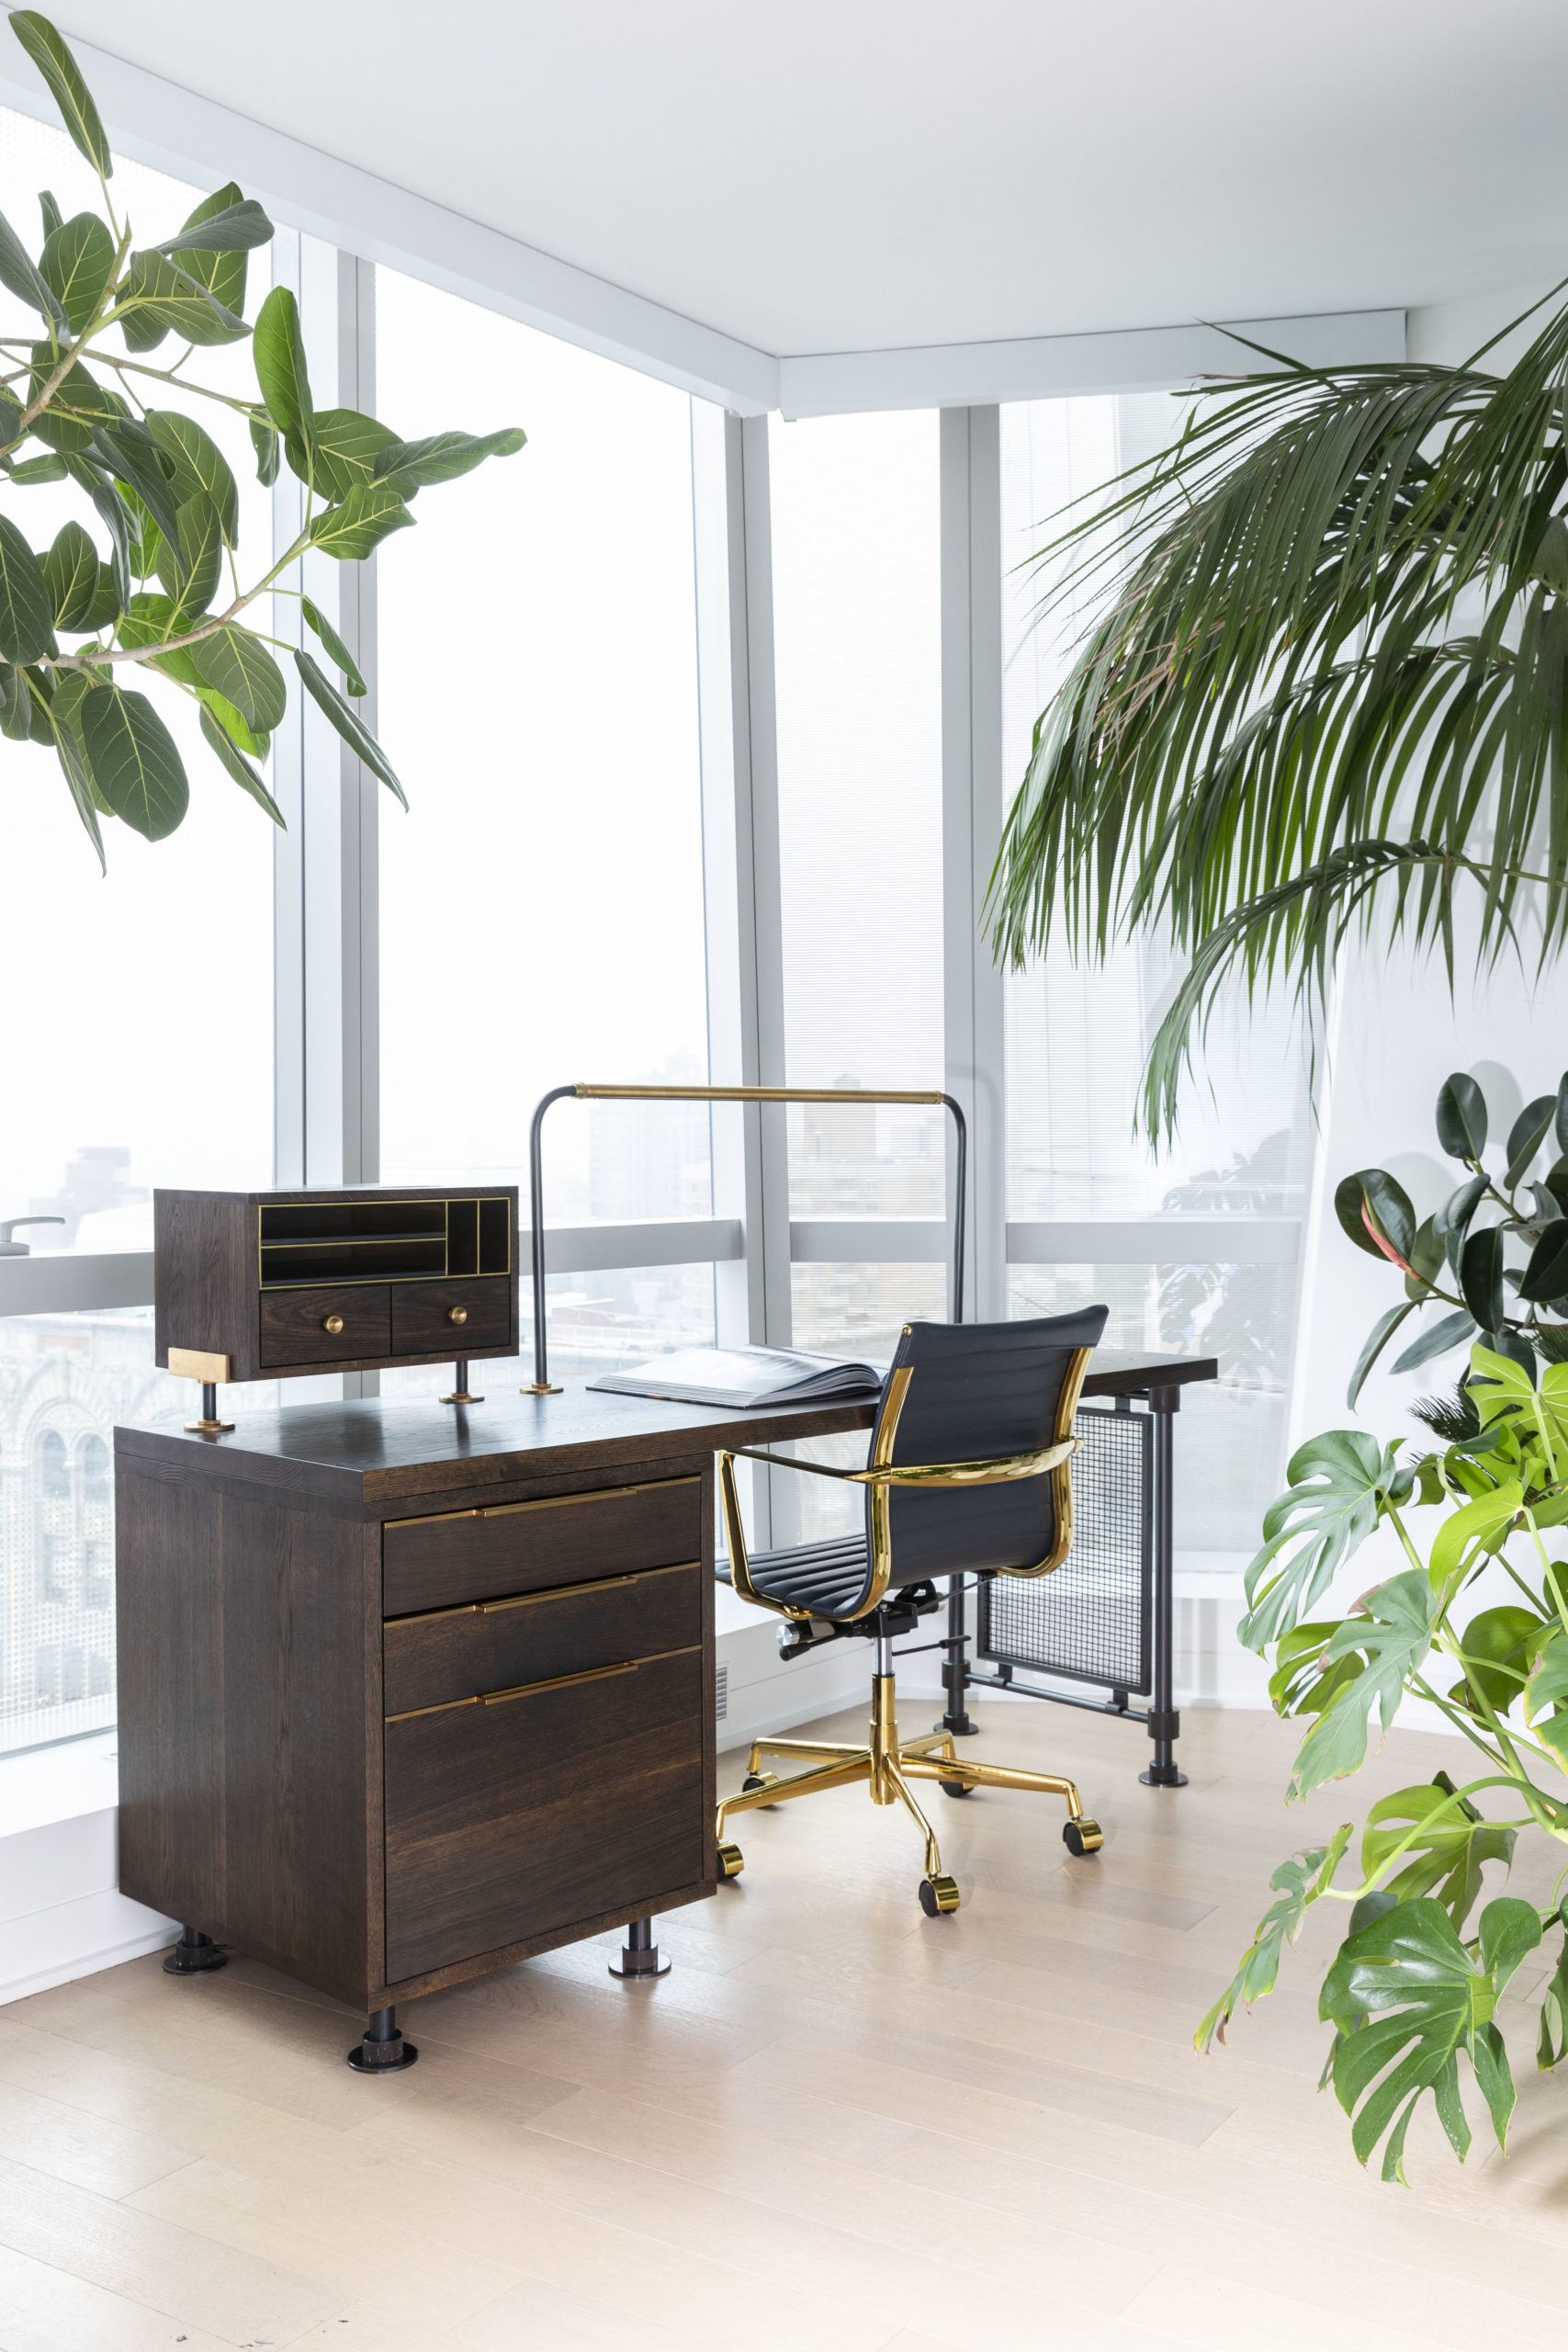 amuneal_products_WNWN_NYDC_nyc-showroom_2Loft-Desk-with-Plants-Angle-scaled-1